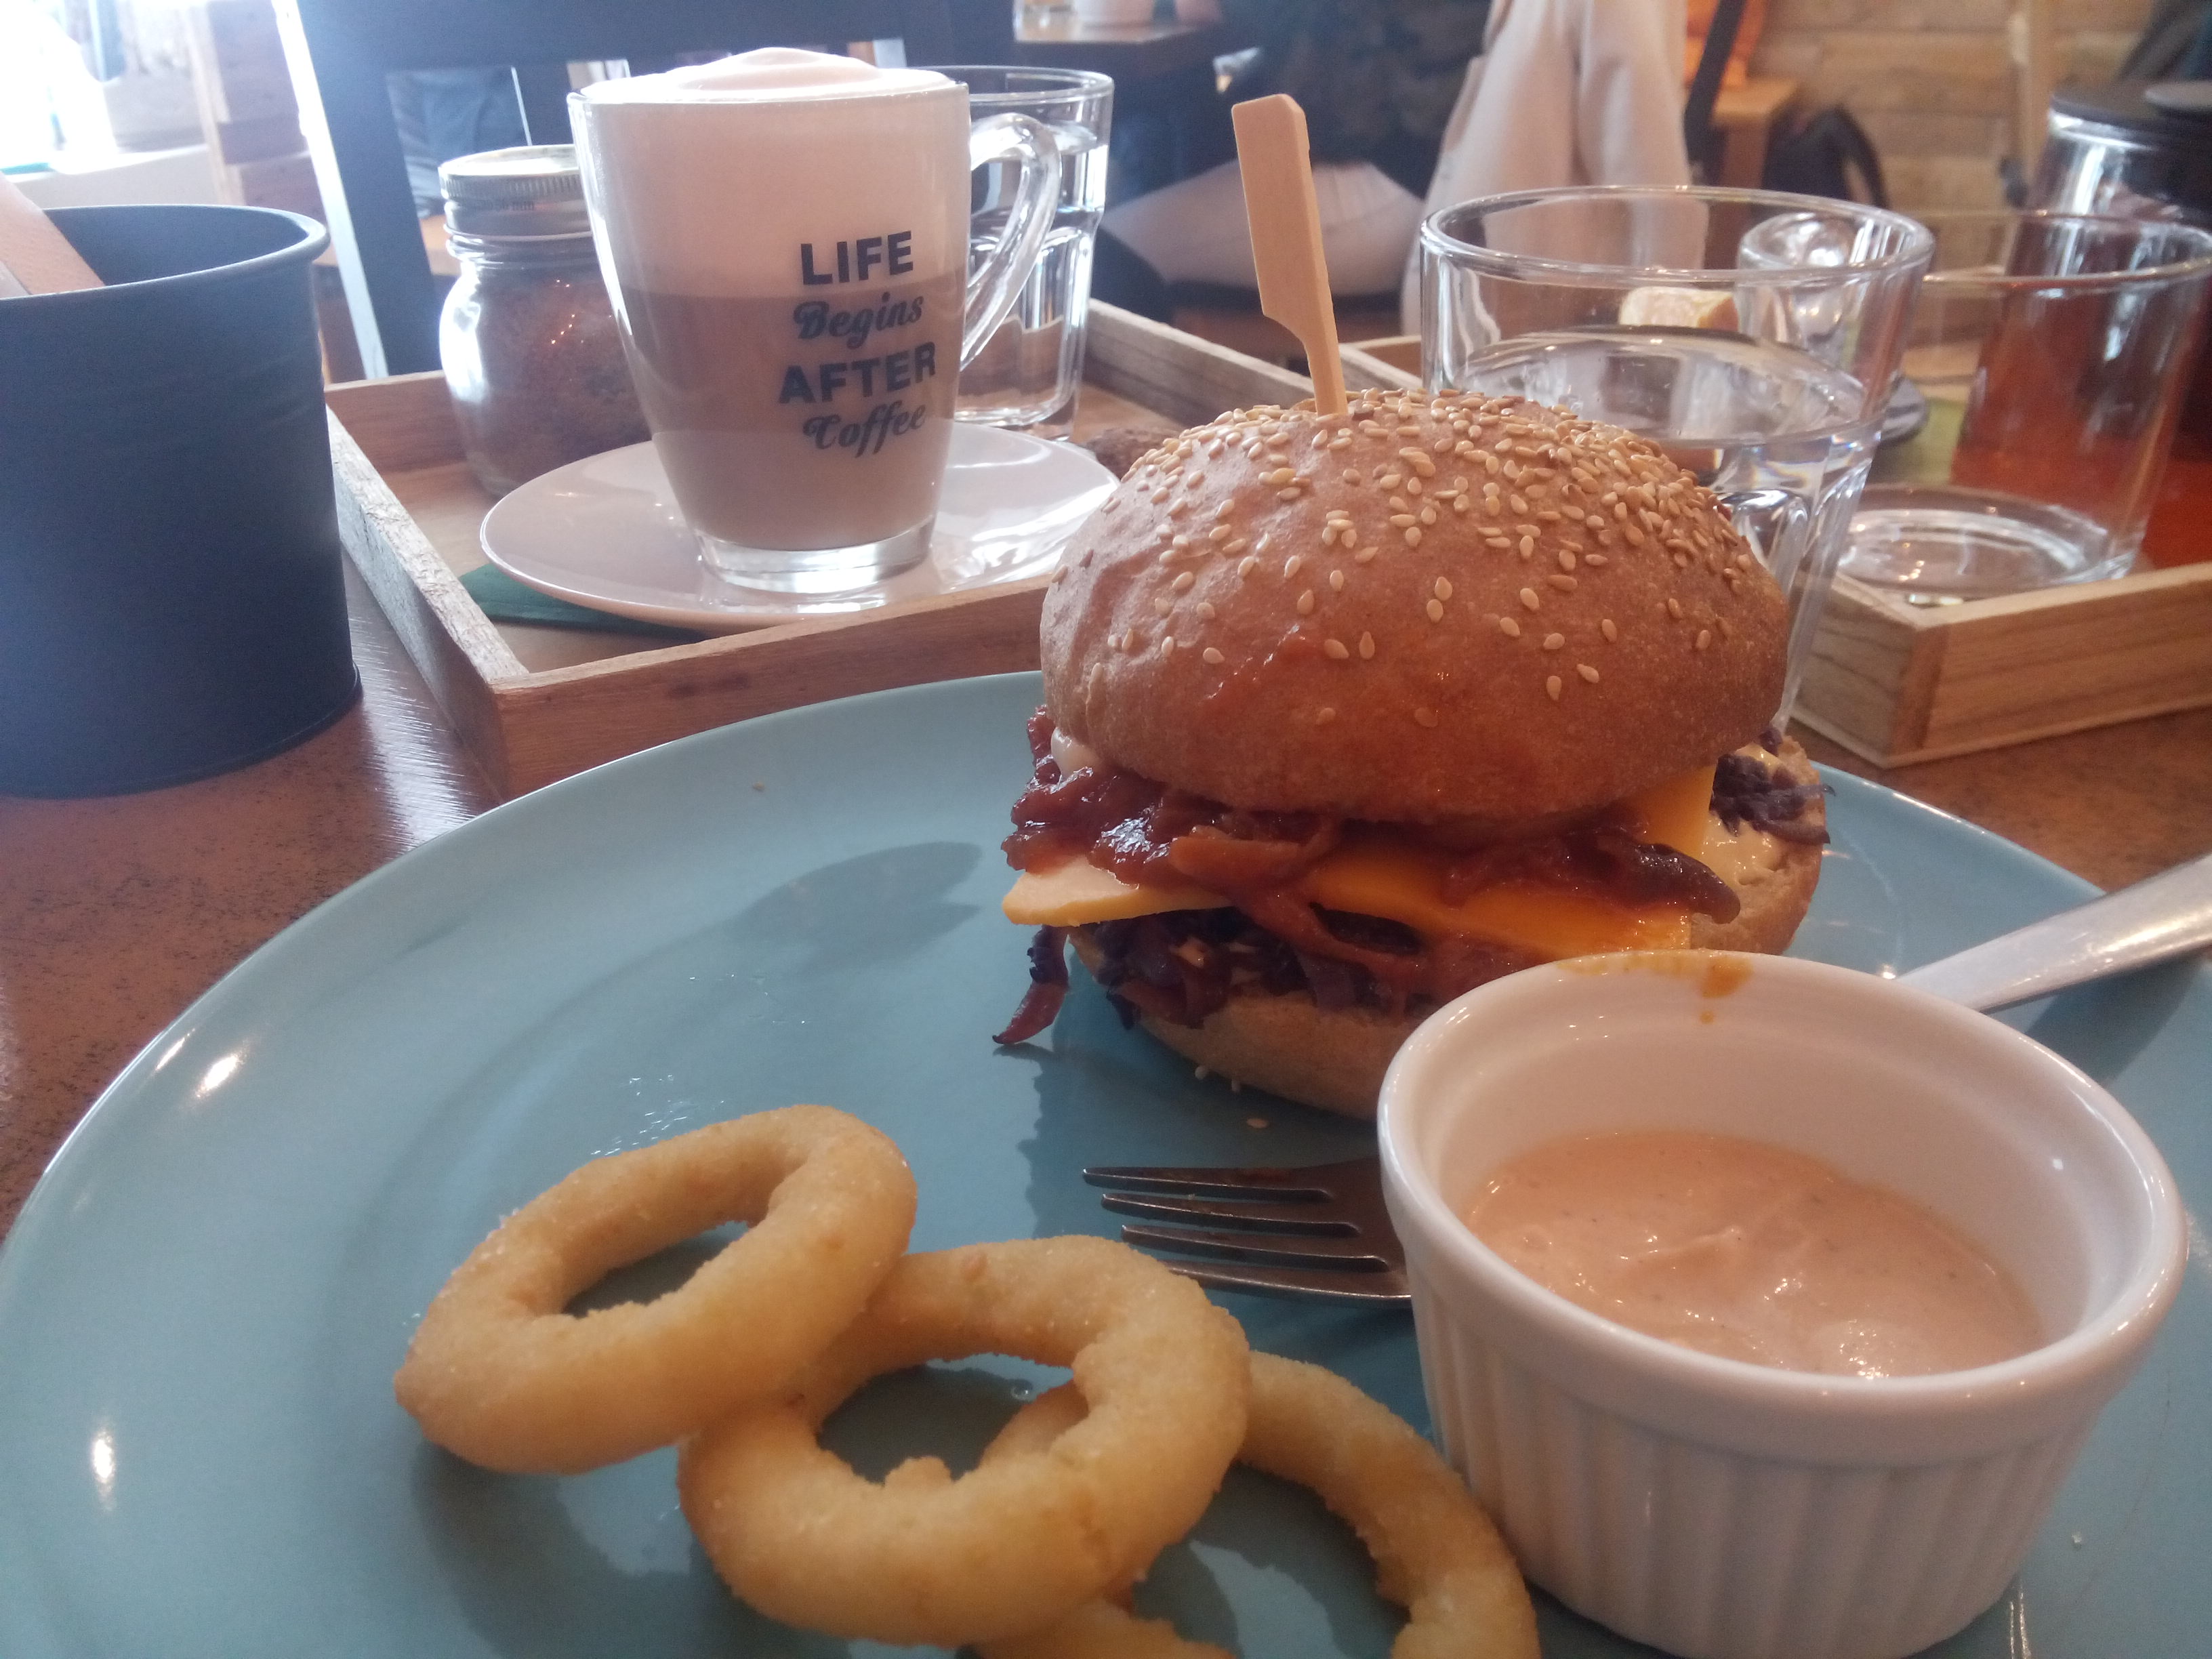 A blue plate with onion rings, a full looking burger, in front of a foamy latte